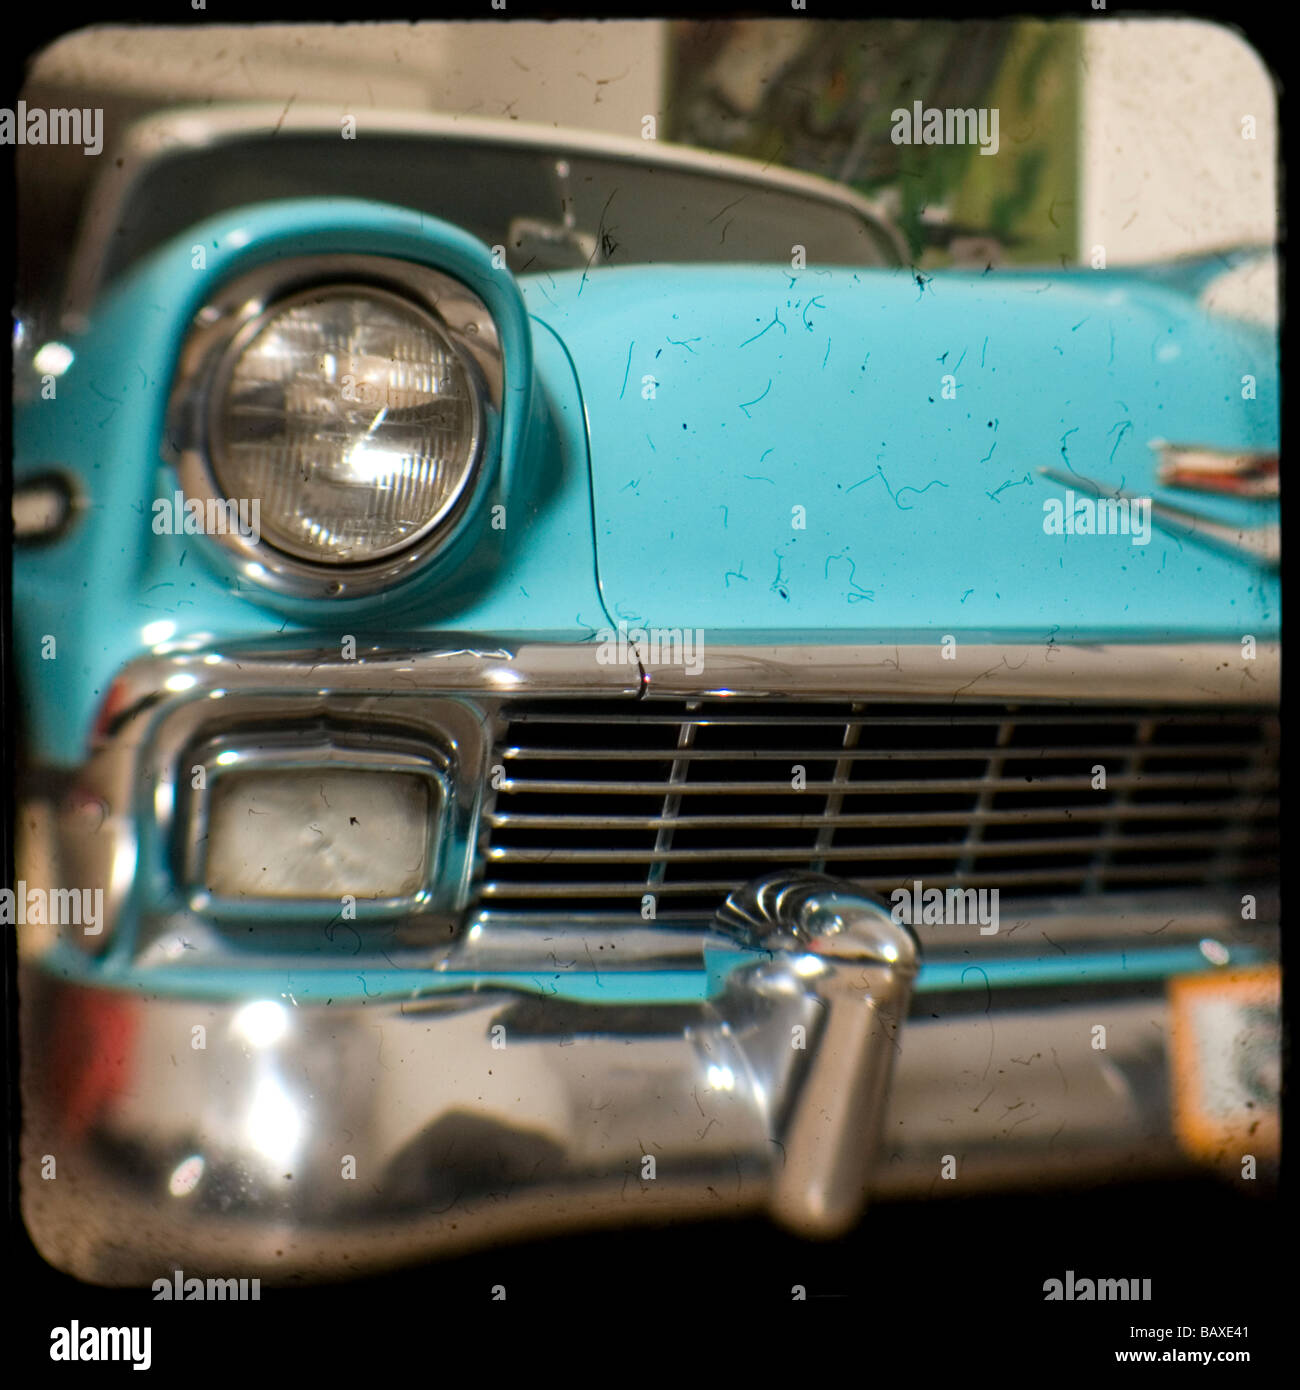 A 1957 Chevrolet Bel Air Stock Photo